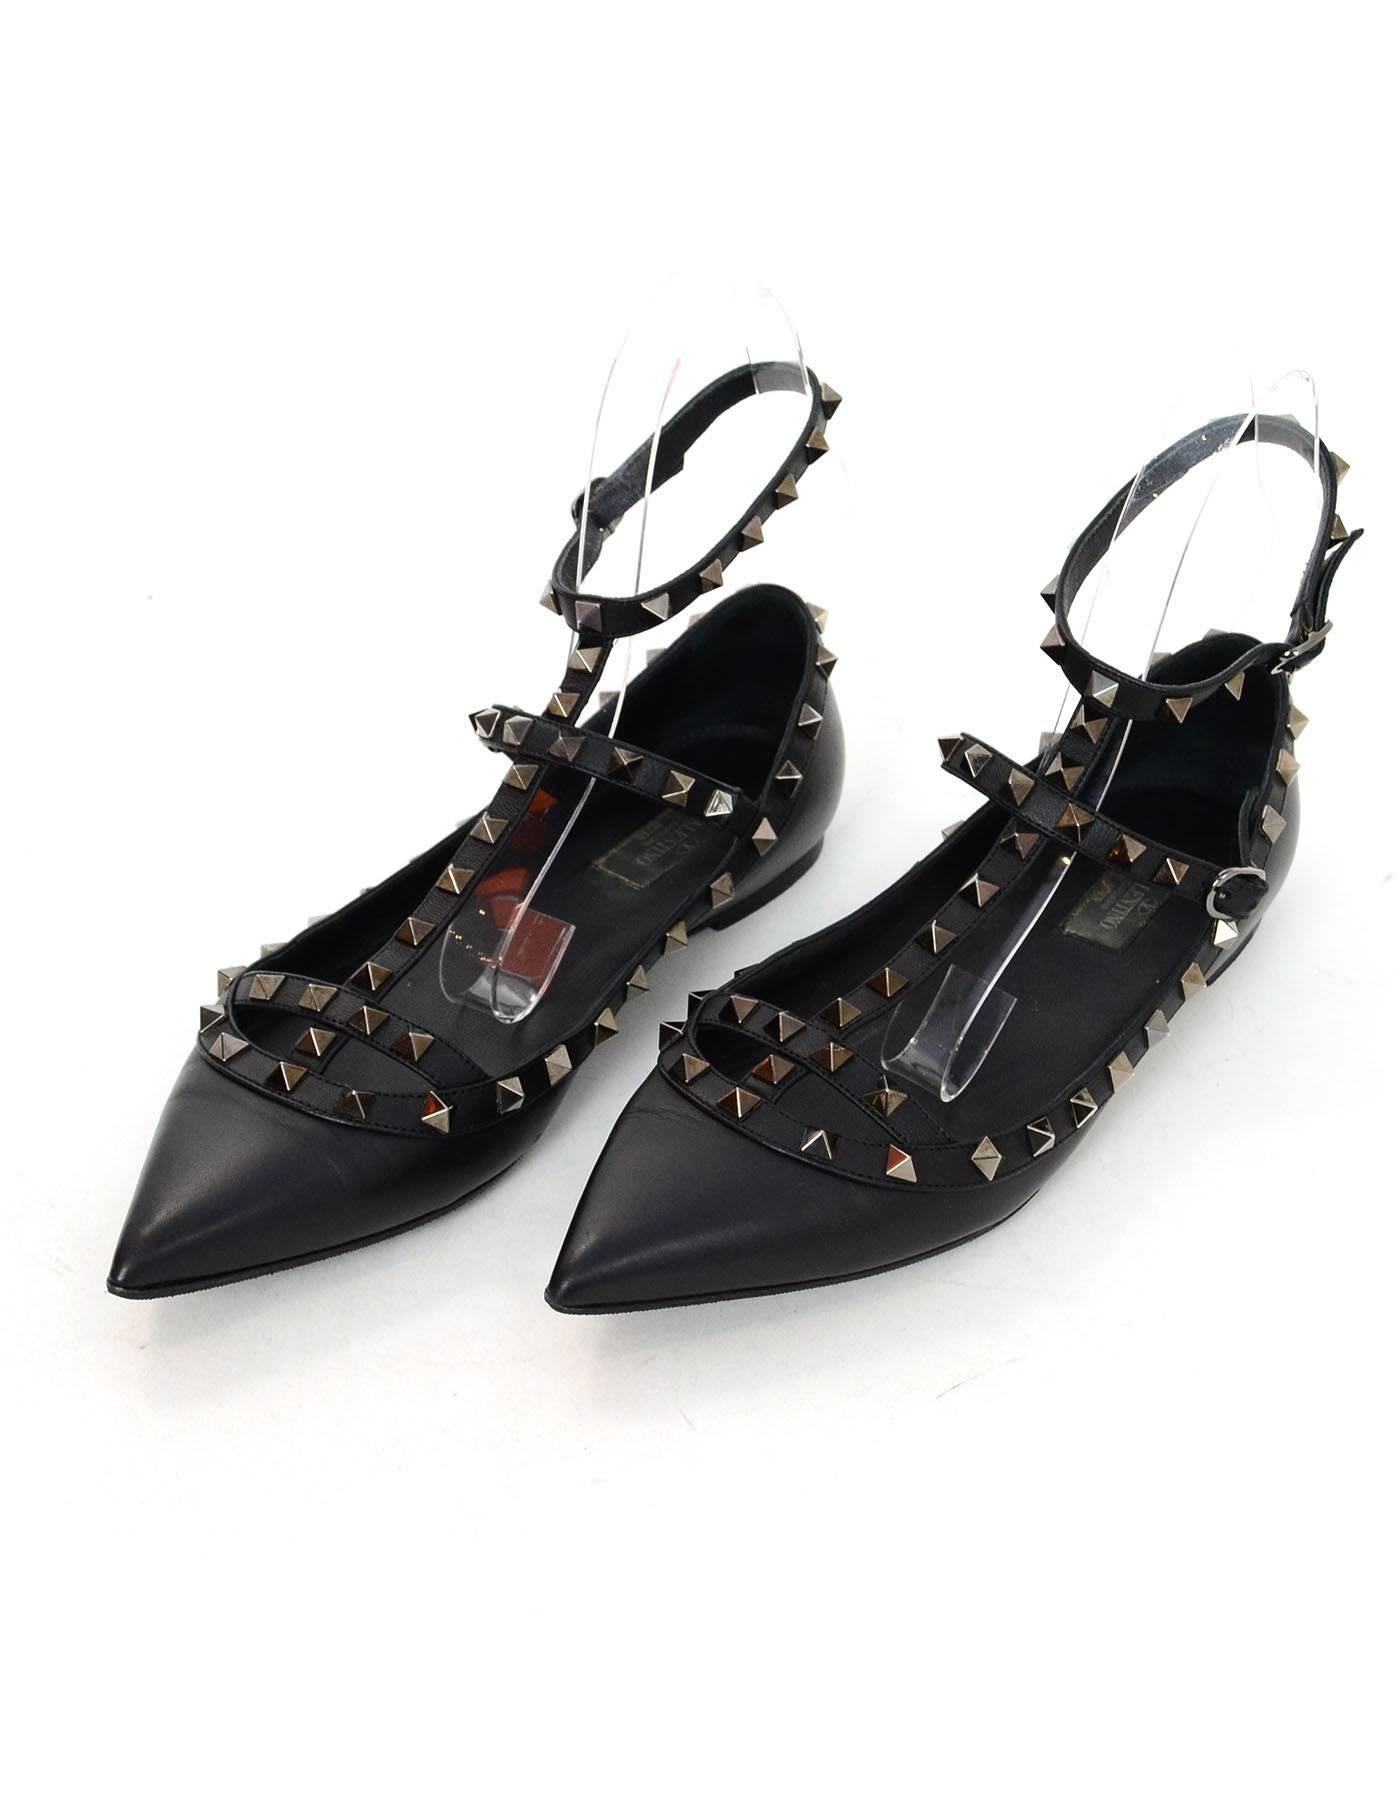 Valentino Noir Leather Rockstud Flats Sz 40.5

Made In: Italy
Color: Black
Materials: Leather, metal
Closure/Opening: Ankle strap with buckle closure
Sole Stamp: Valentino Garavani Made in Italy 40.5
Overall Condition: Excellent pre-owned condition